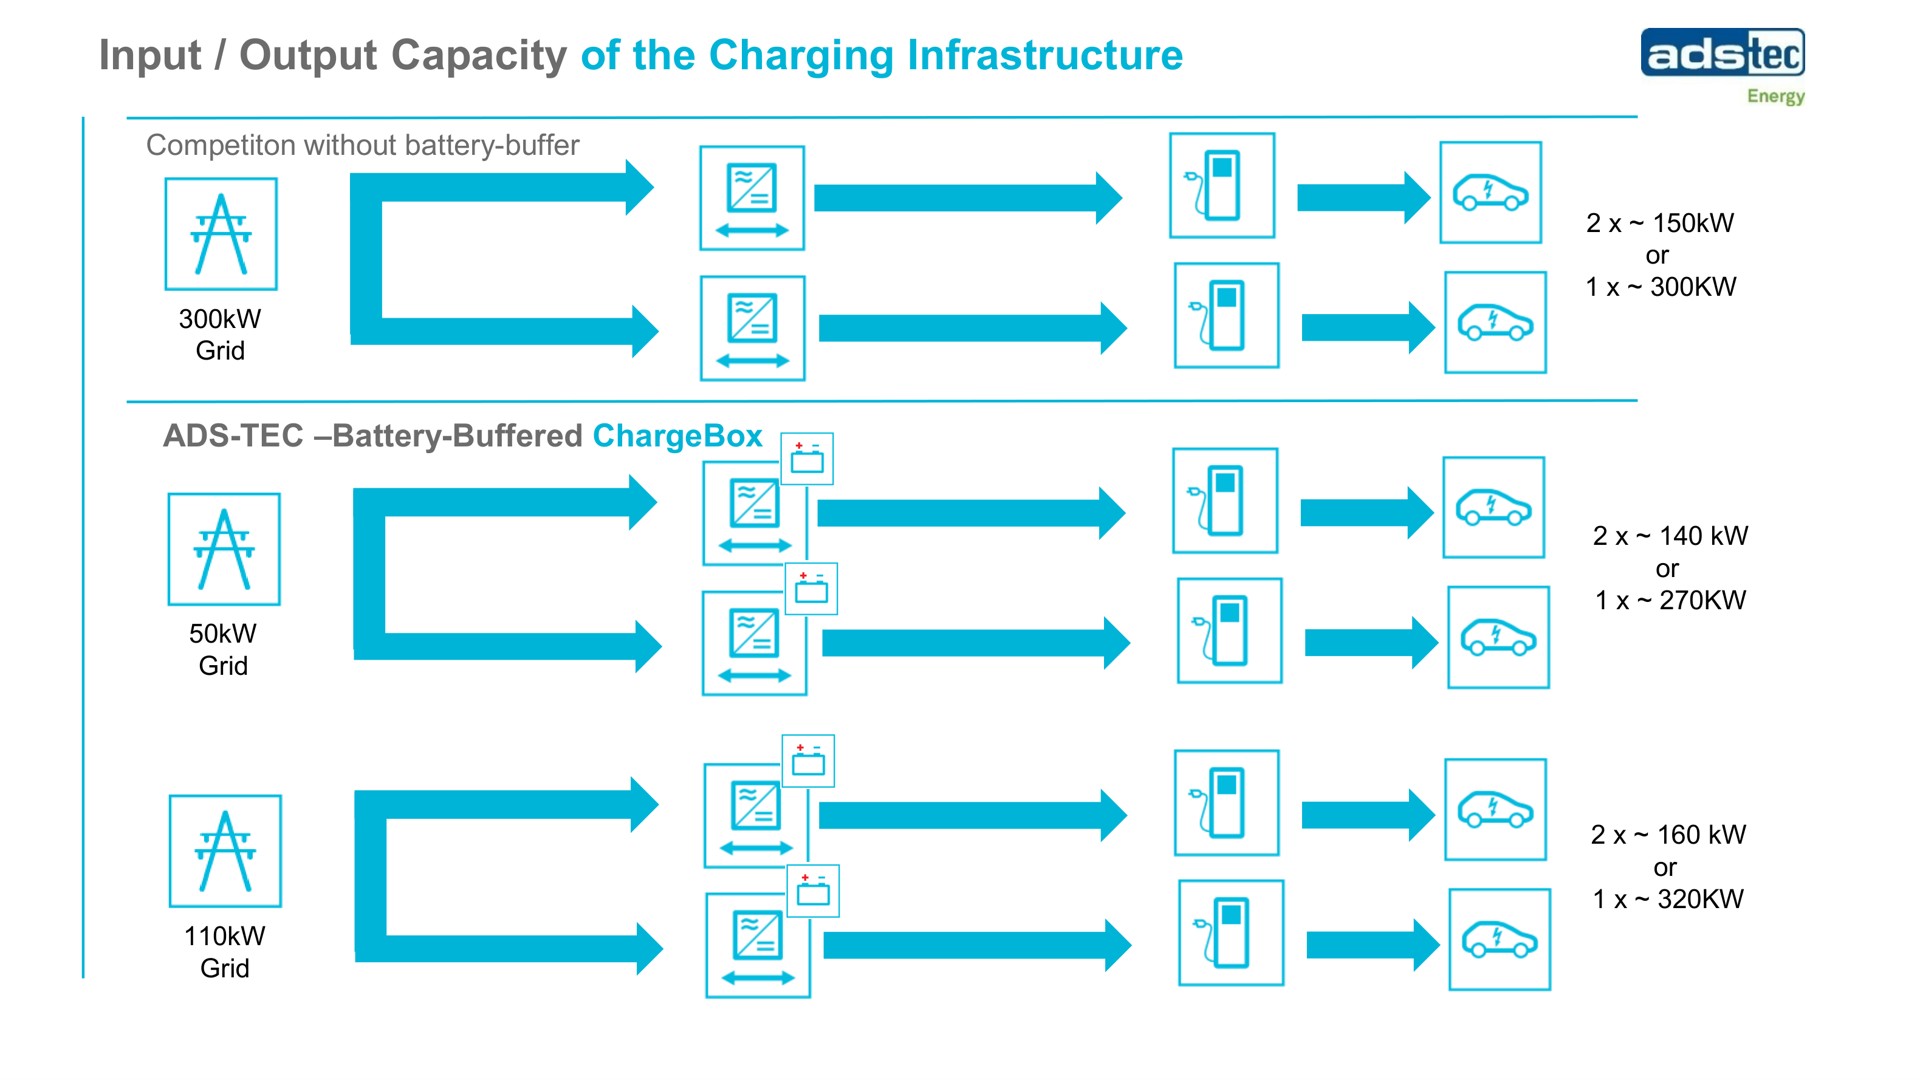 input output capacity of the charging infrastructure a it me be me | ads-tec Energy